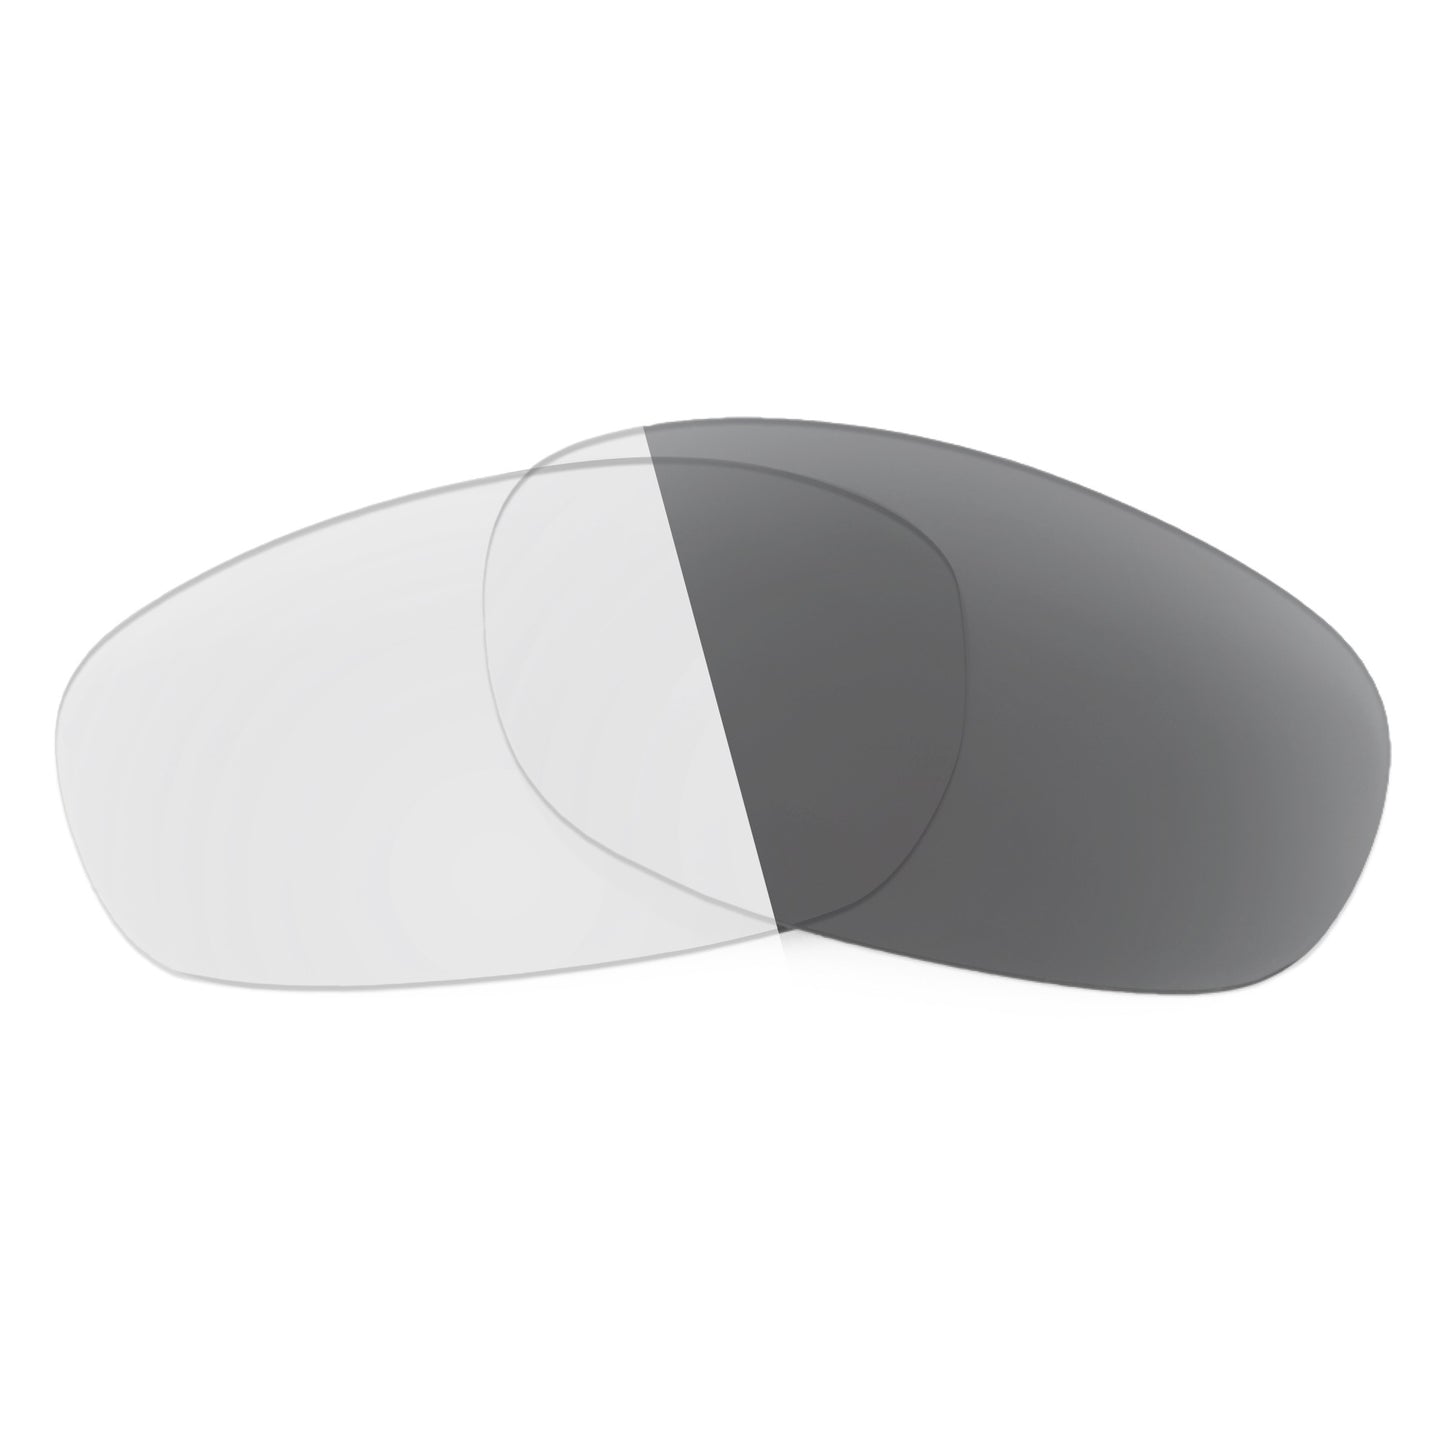 Revant replacement lenses for Oakley Racing Jacket (2021) Non-Polarized Adapt Gray Photochromic